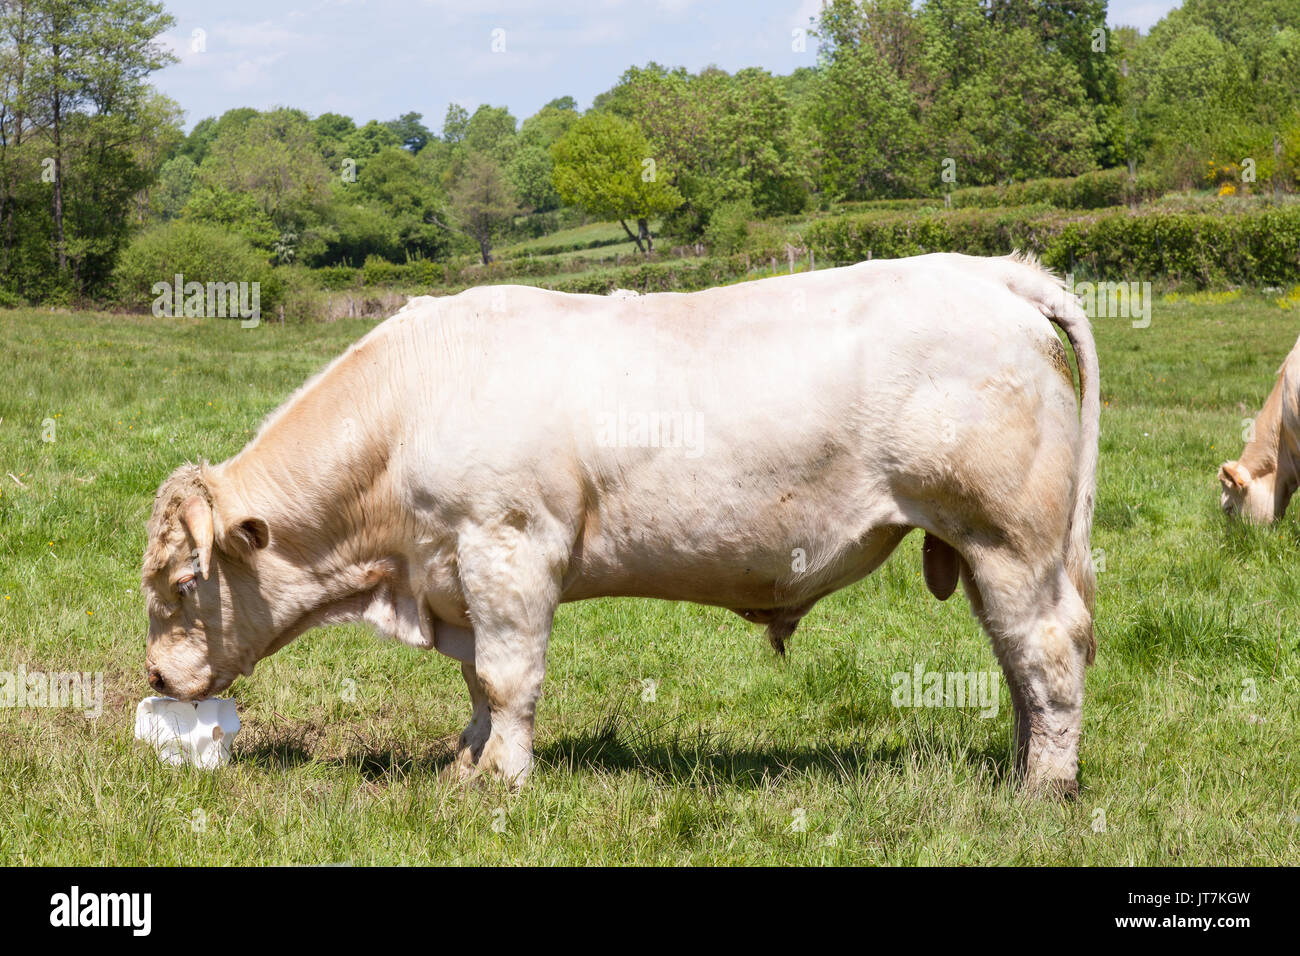 Large white Charolais beef bull eating a block of salt lick mineral supplement in a green grassy pasture with a cow grazing to the side, close up prof Stock Photo